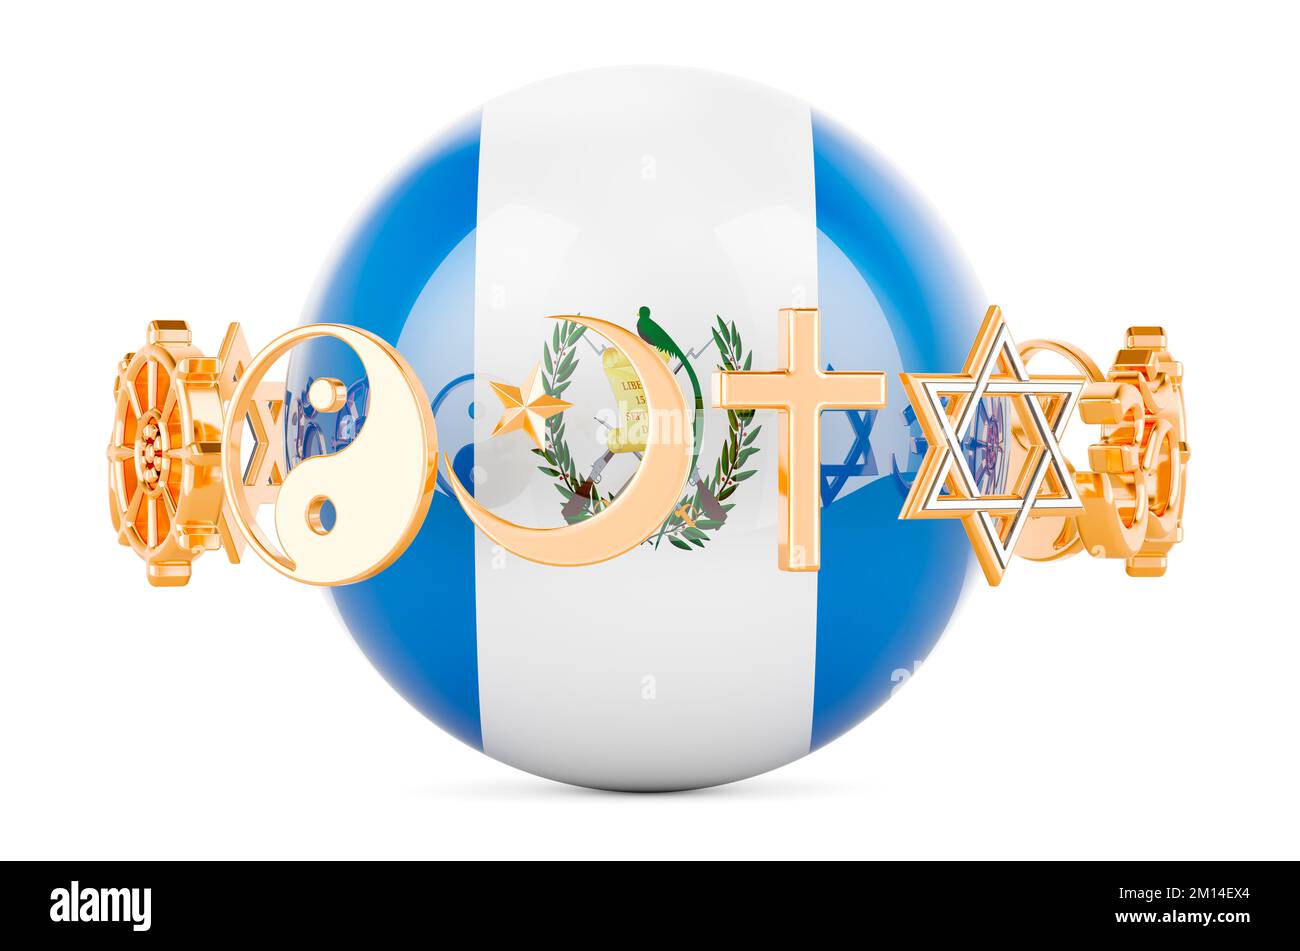 Guatemalan flag painted on sphere with religions symbols around, 3D rendering isolated on white background Stock Photo